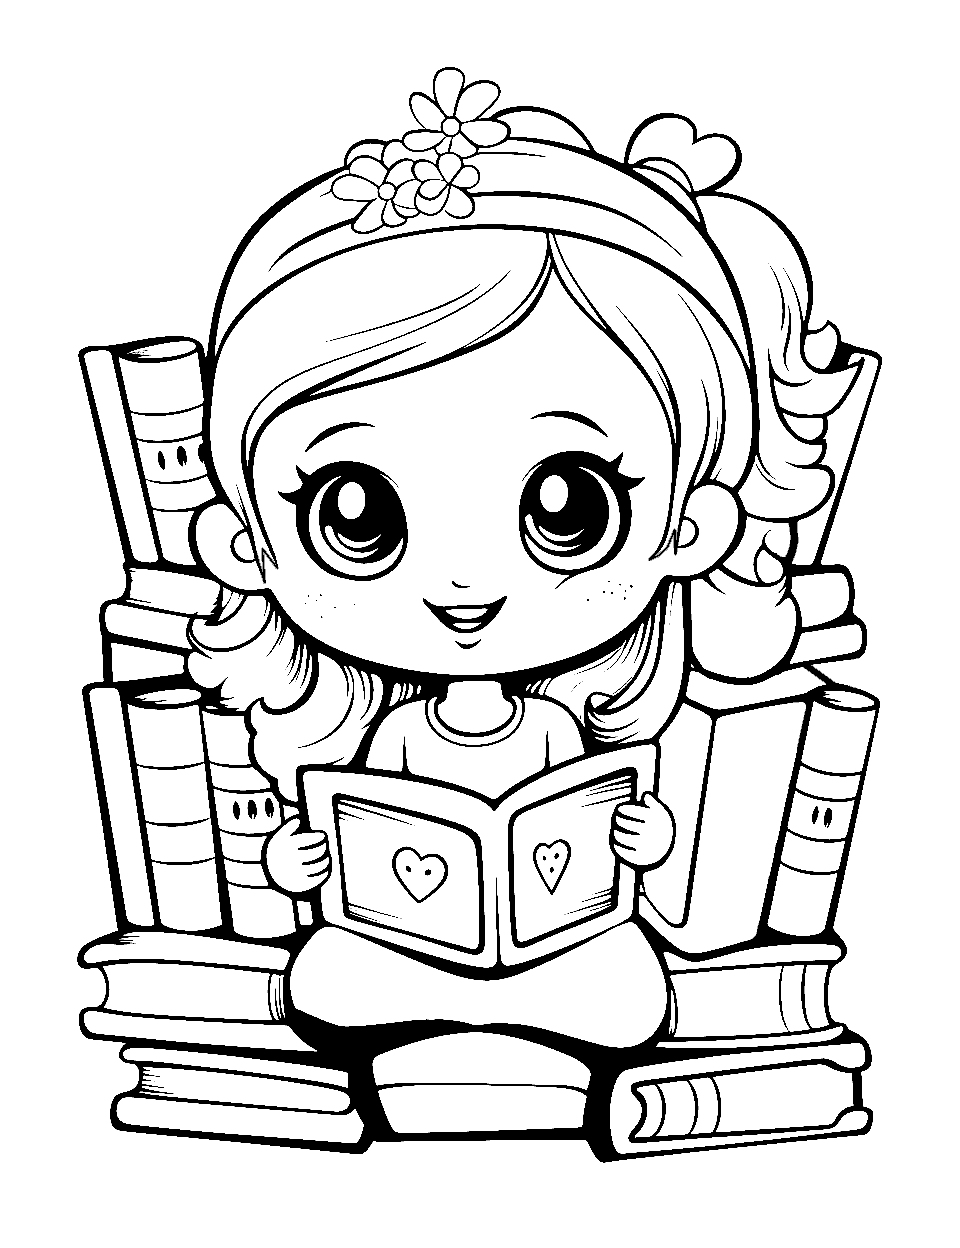 Library Learning Time Coloring Page - Shopkin reading books in a cozy library setting.